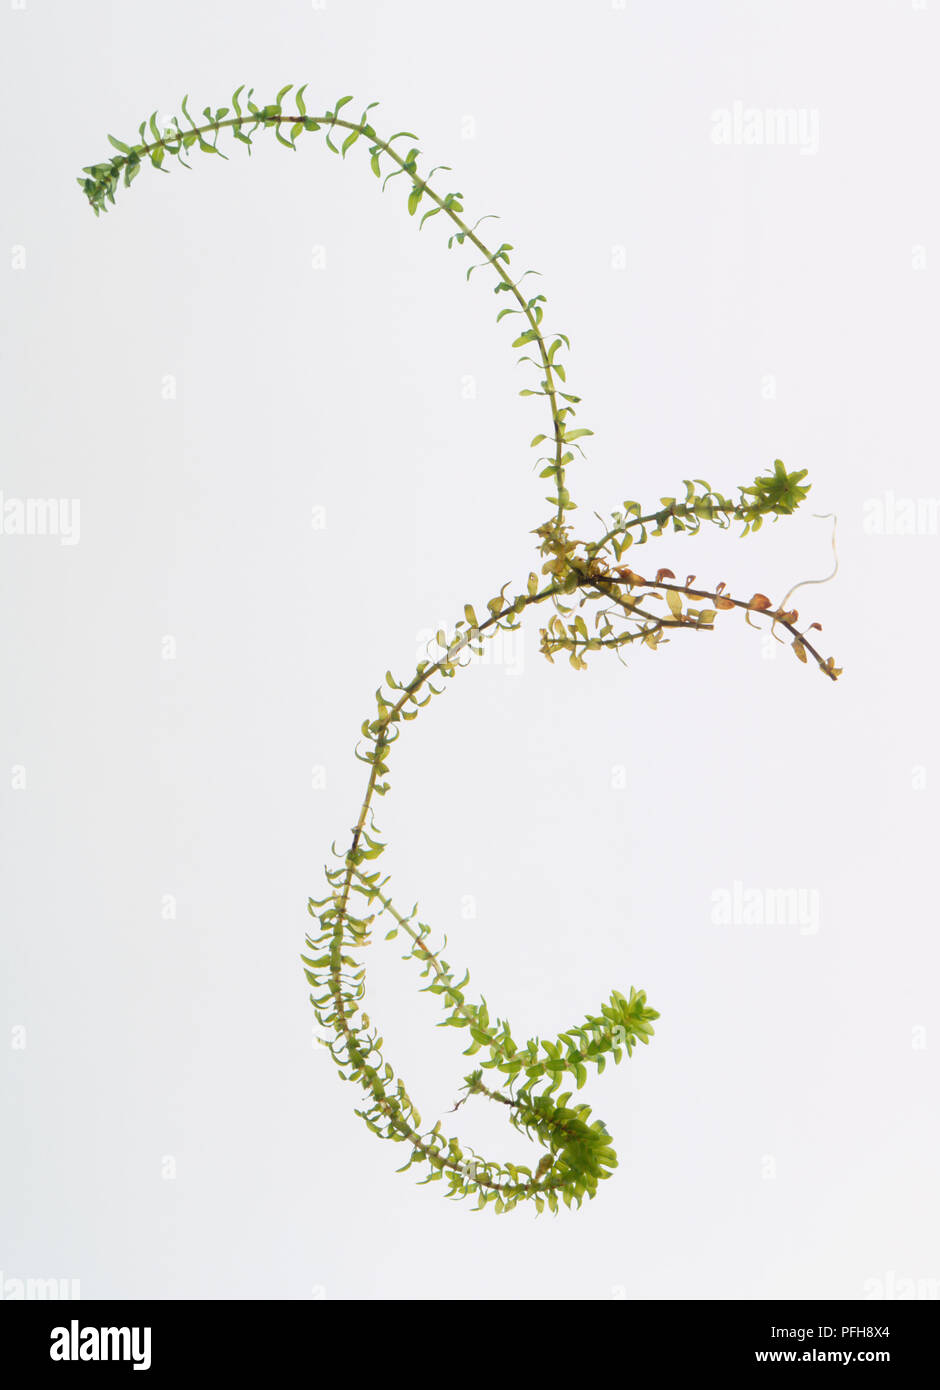 Elodea canadensis (Canadian pond weed) Stock Photo